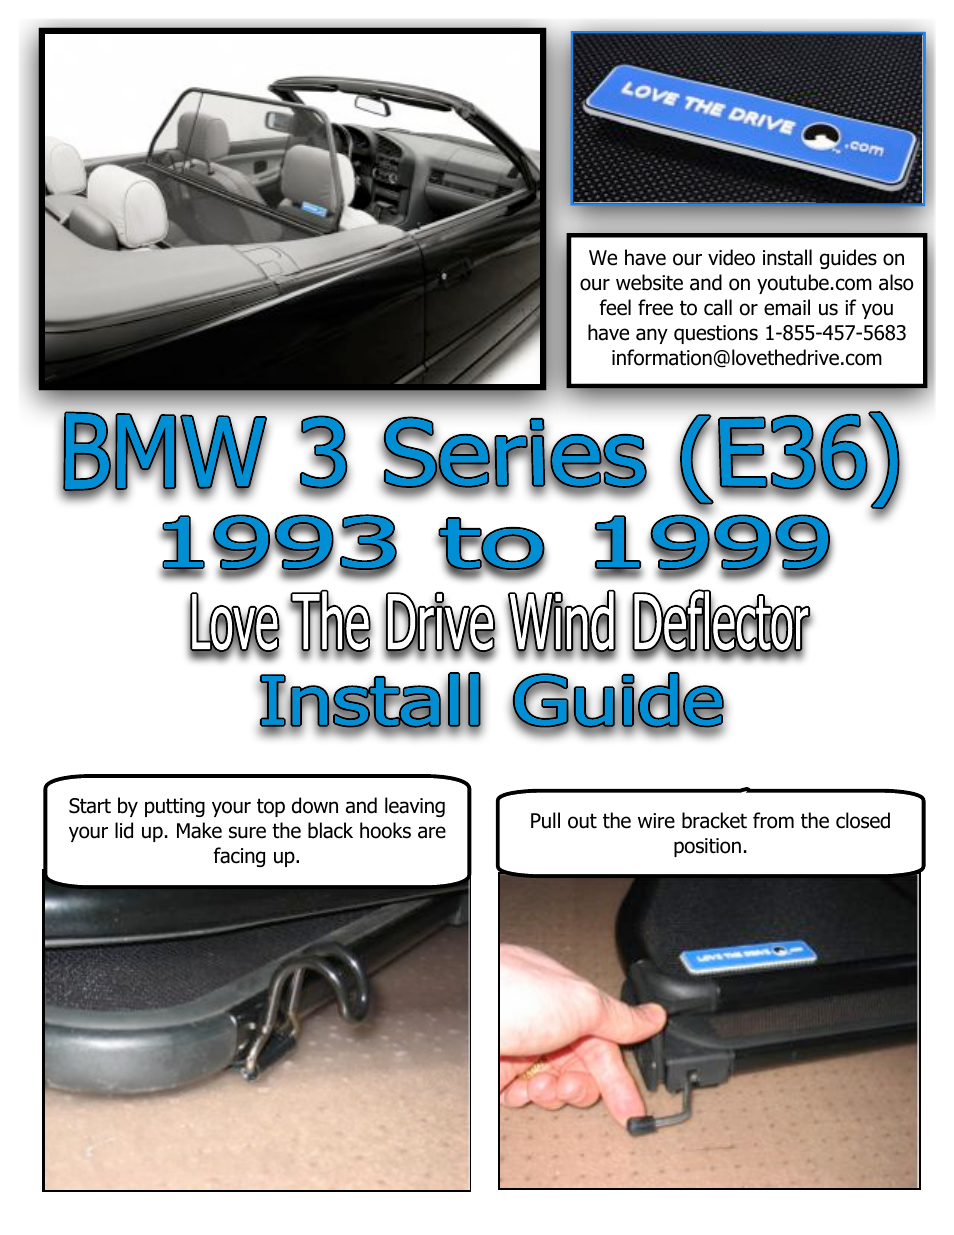 BMW Windstop 3 series (E36) 318, 323, 325, 328, 1993 to 1999